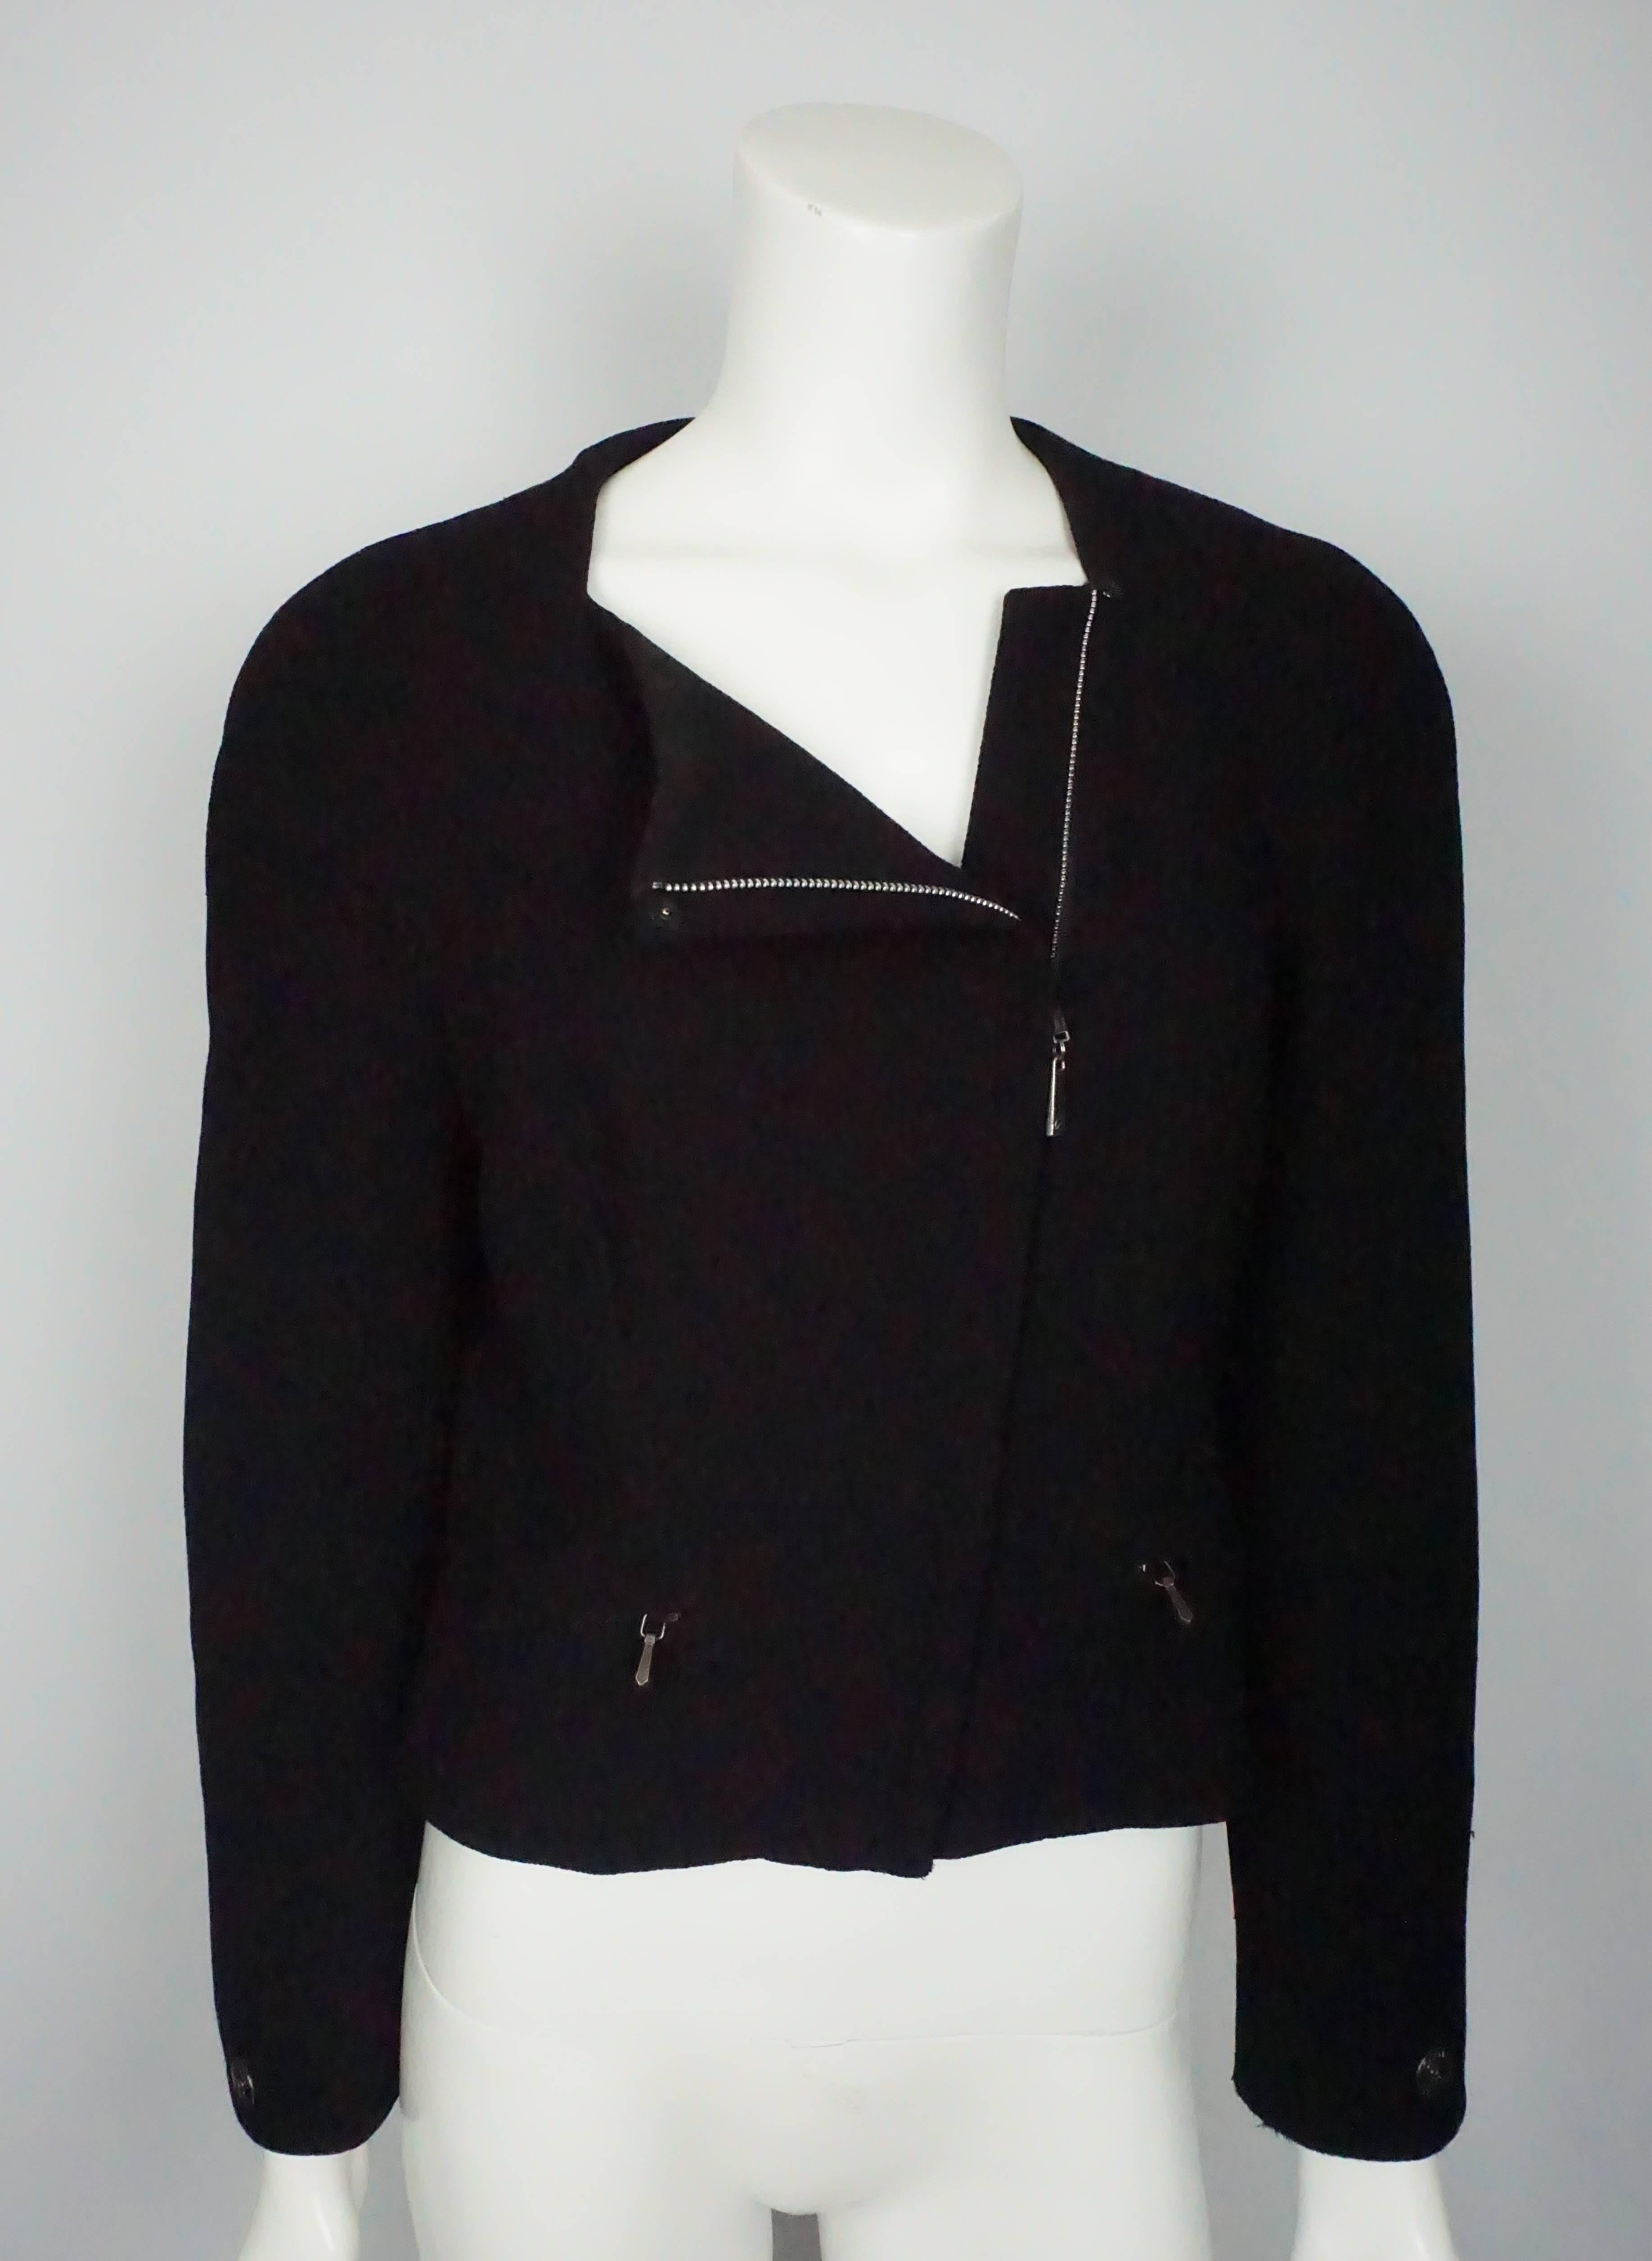 Chanel Black Wool Cropped Jacket with Asymmetrical Zipper Size 40 Circa 1997 For Sale 1